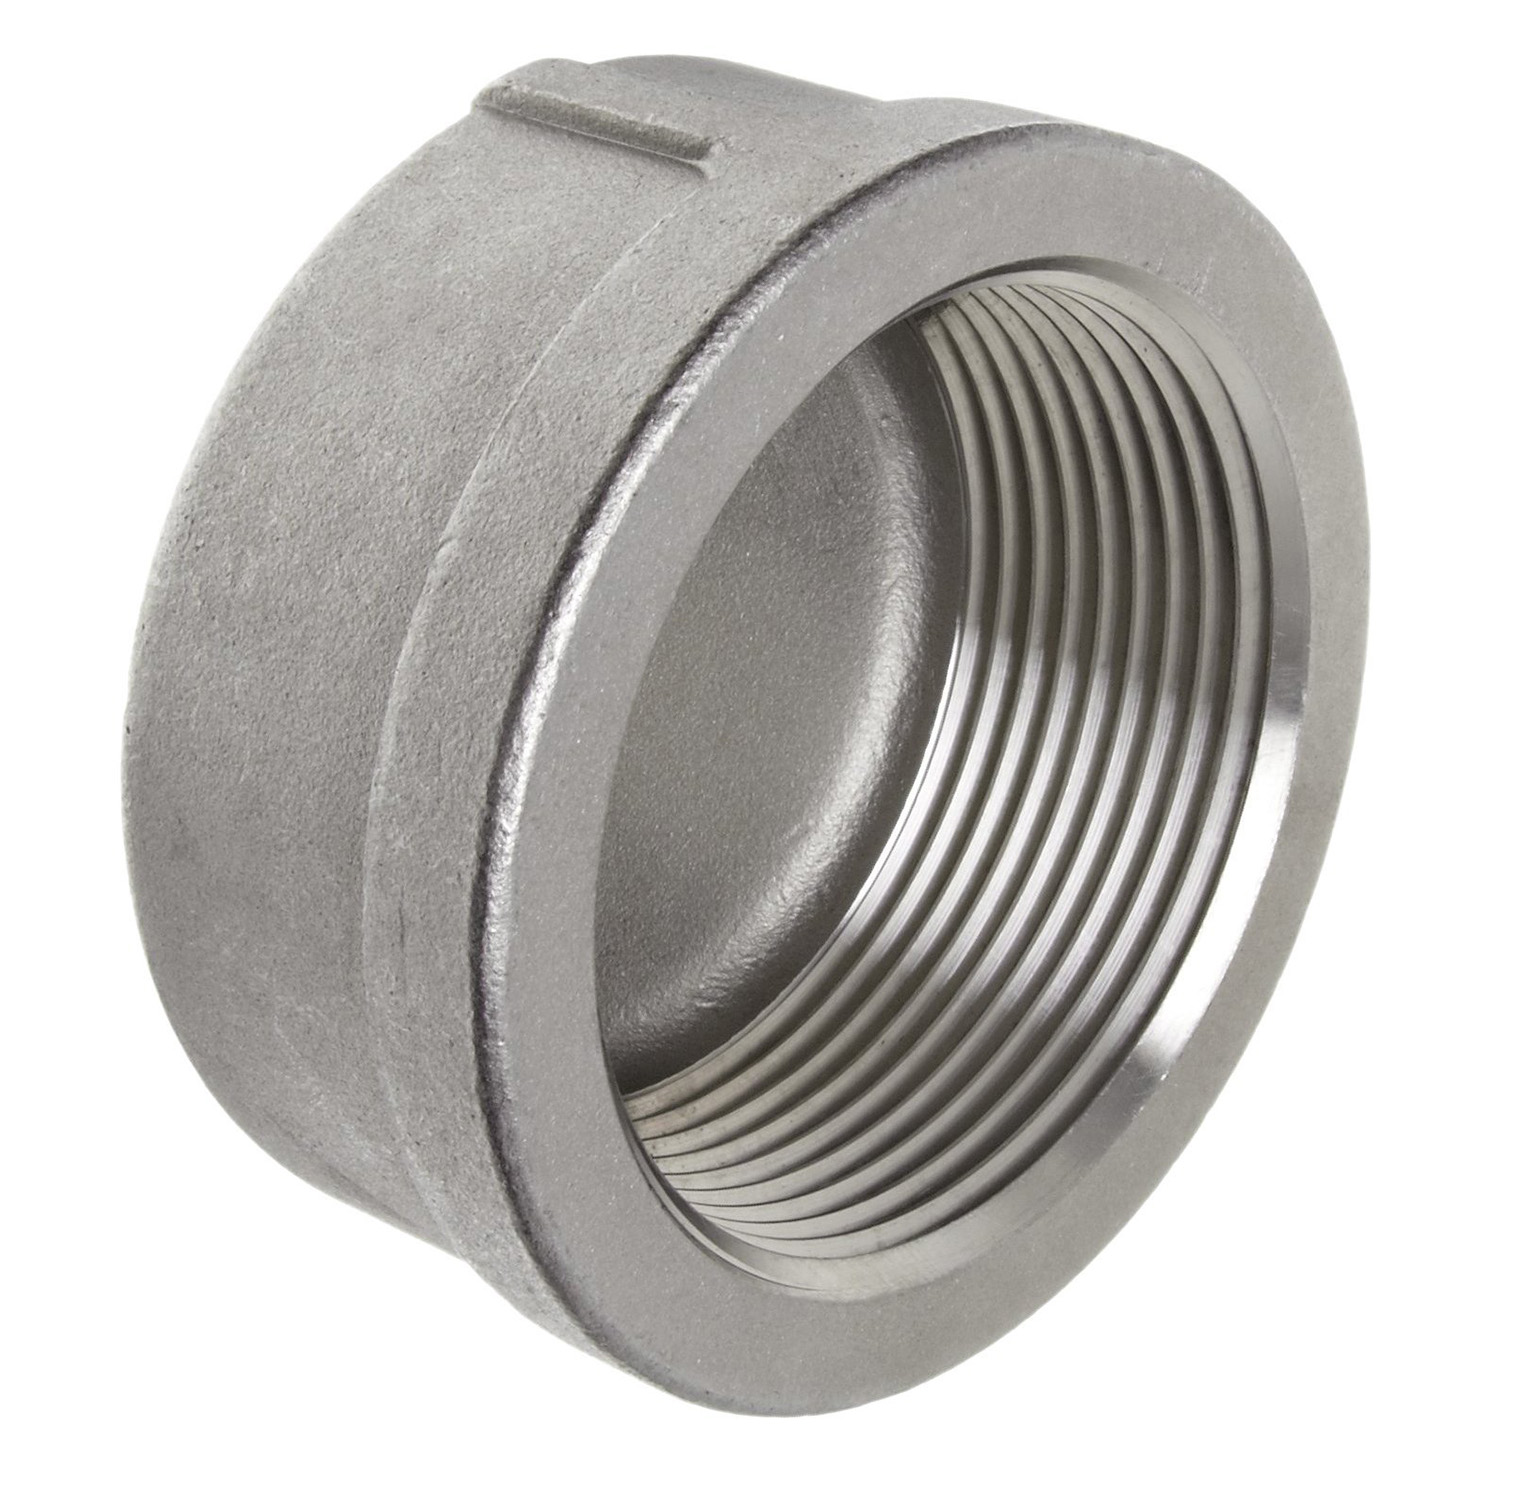 4" Rated 150LB Half Socket Stainless Steel Pipe Fitting 1/8" 